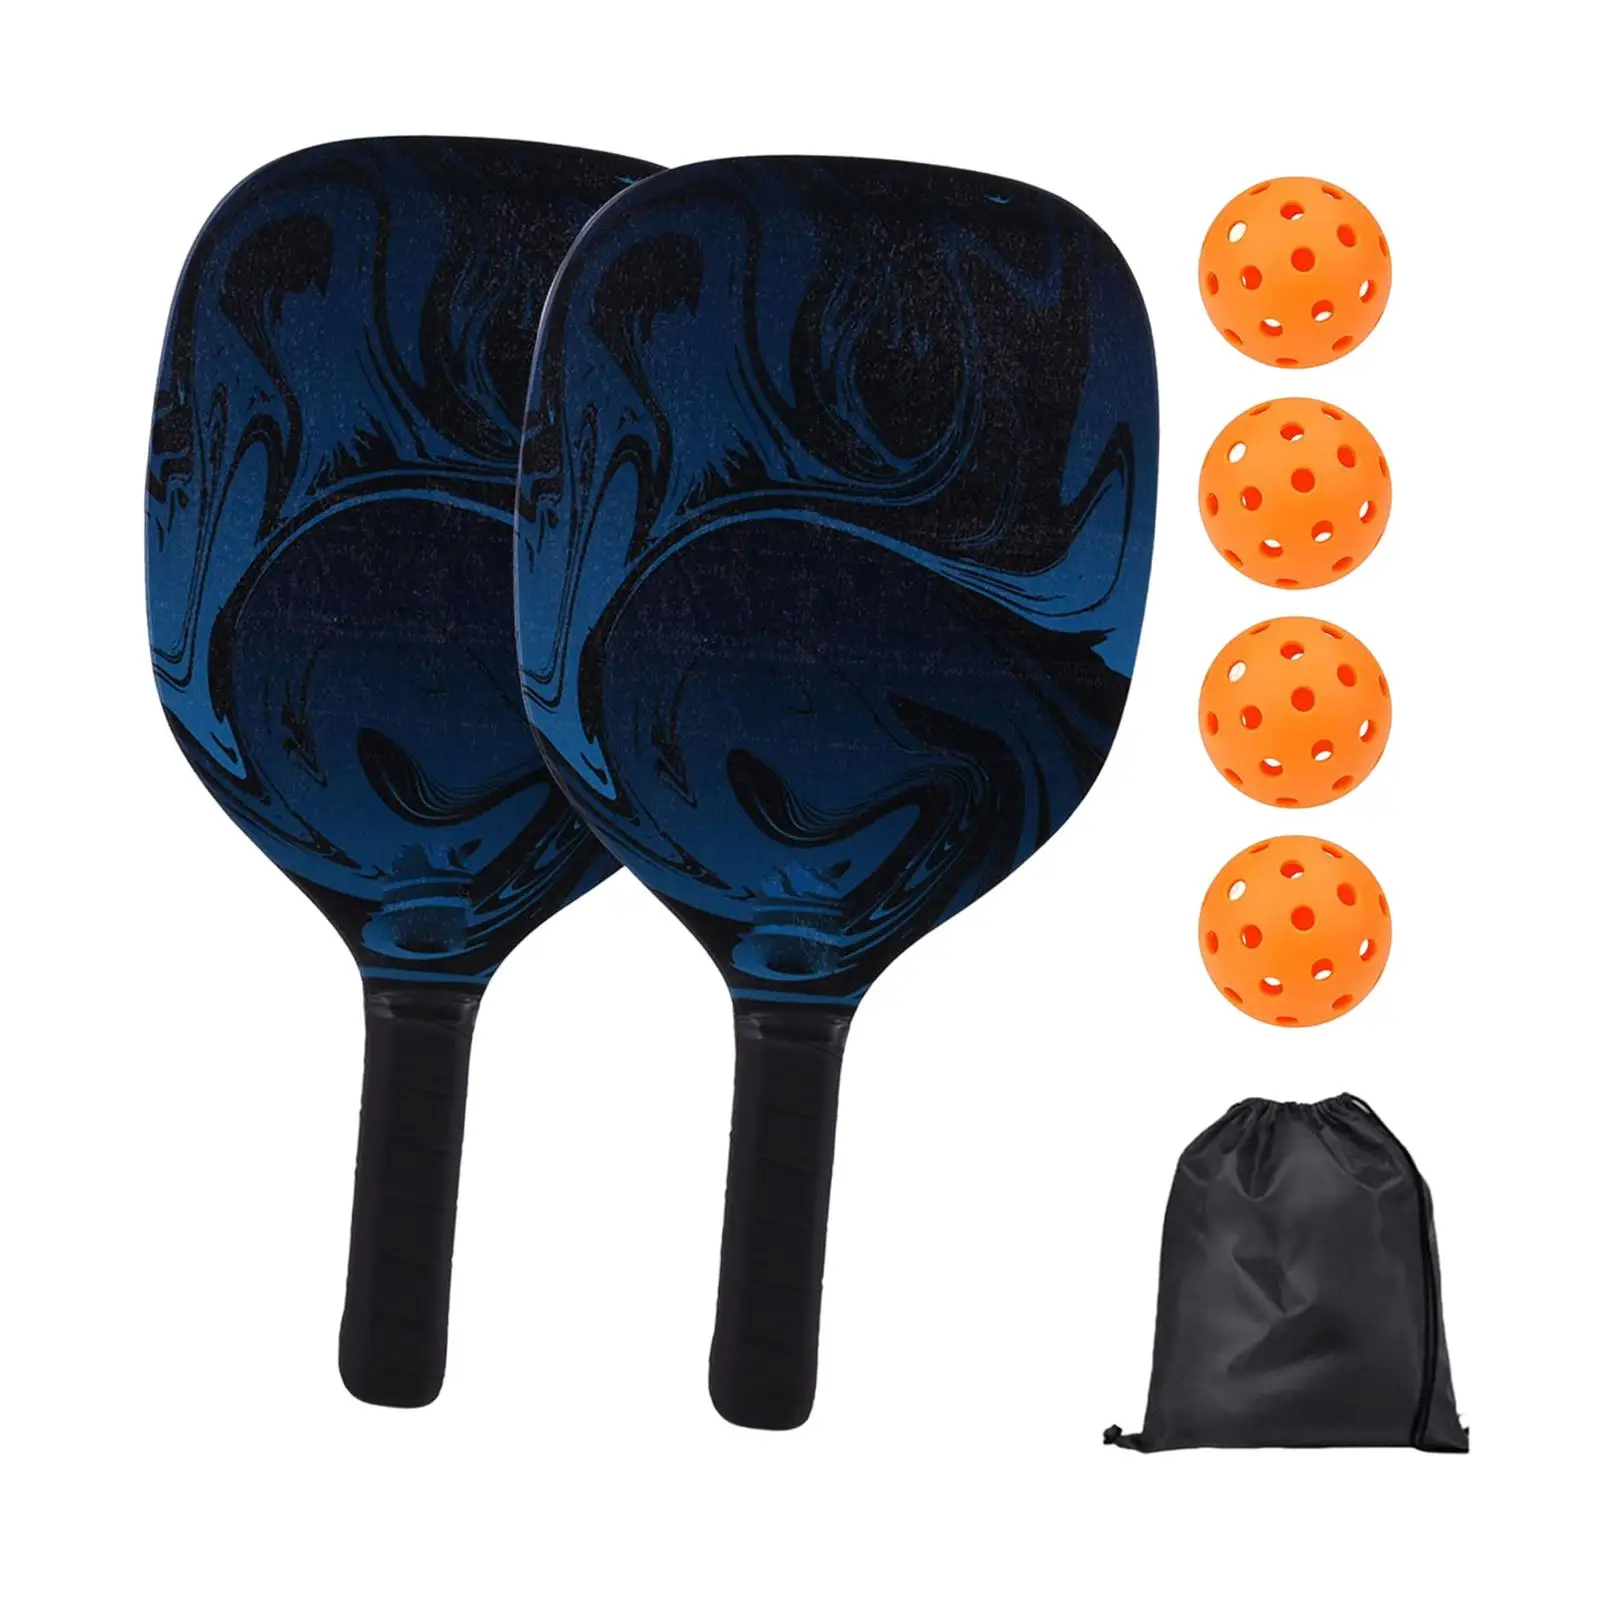 Pickleball Racket Kit Wood for Beach or Park with 2 Pickleball Racquets